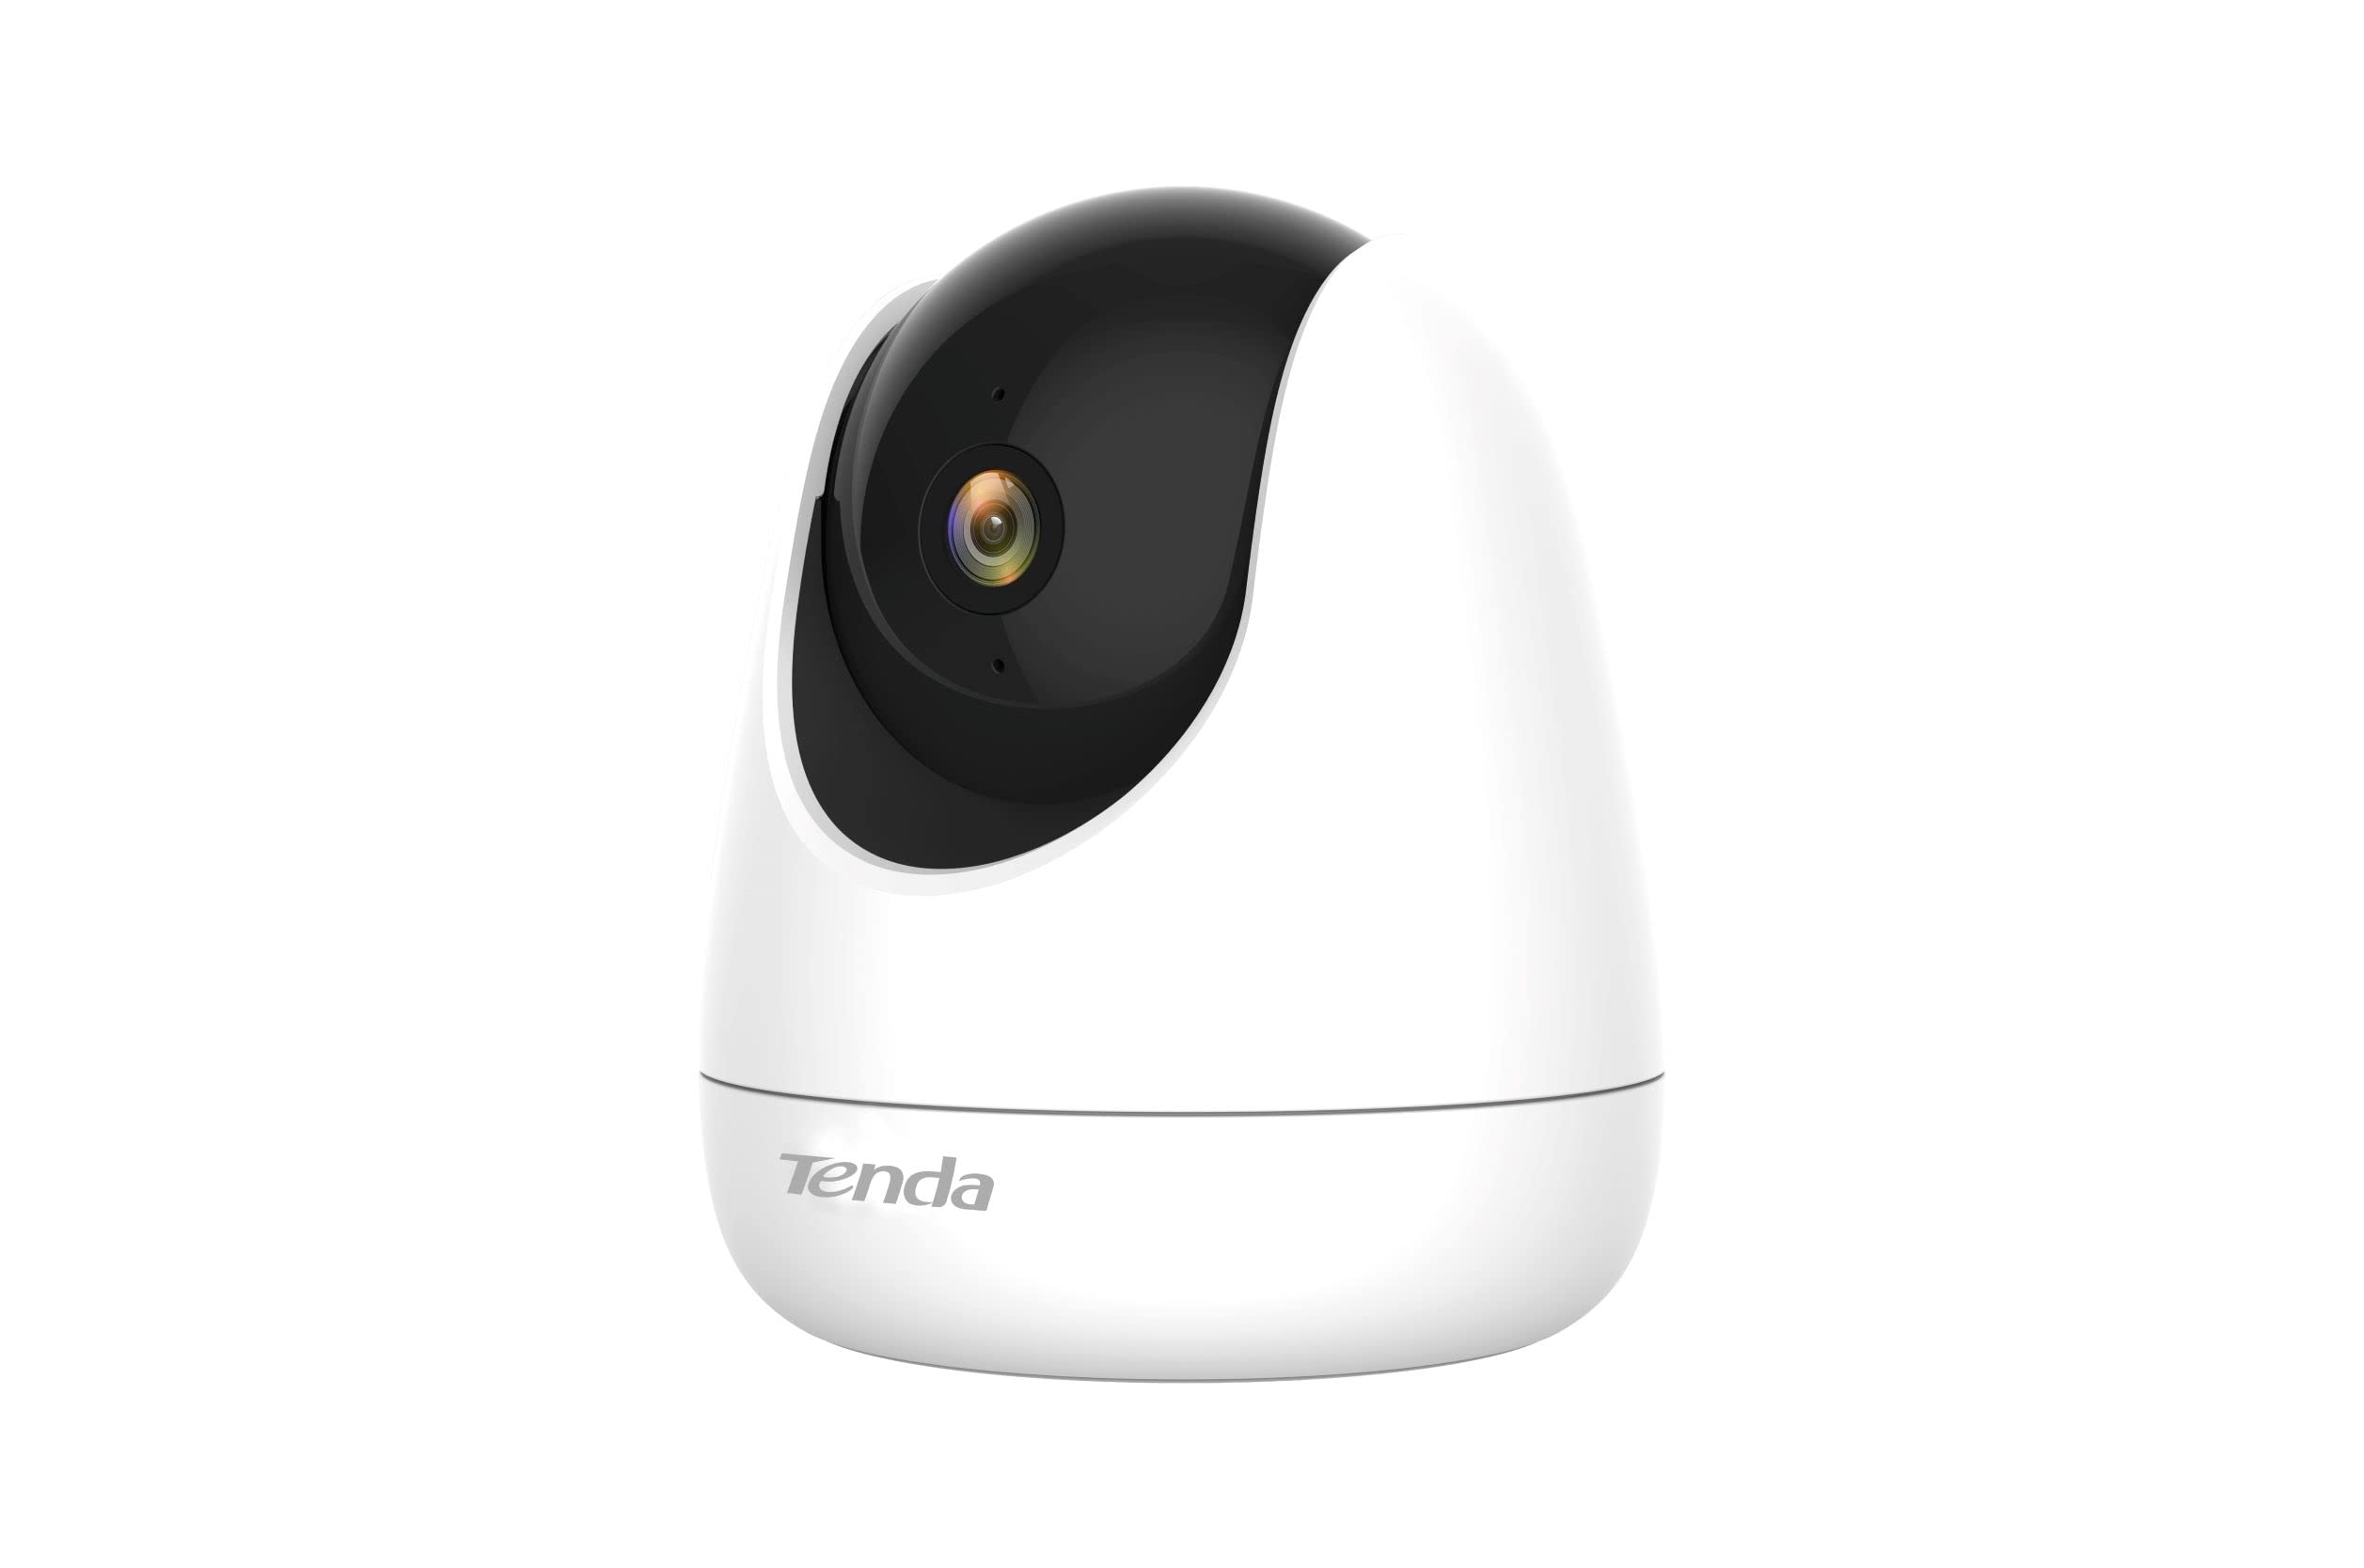 Tenda CP6 2K Indoor Wireless Pan Tilt Cameras for Home Security, Baby Monitor, Pet Camera with Phone APP, 2-Way Audio, Night Vision, Auto Tracking, Siren, AI Human & Motion Detection